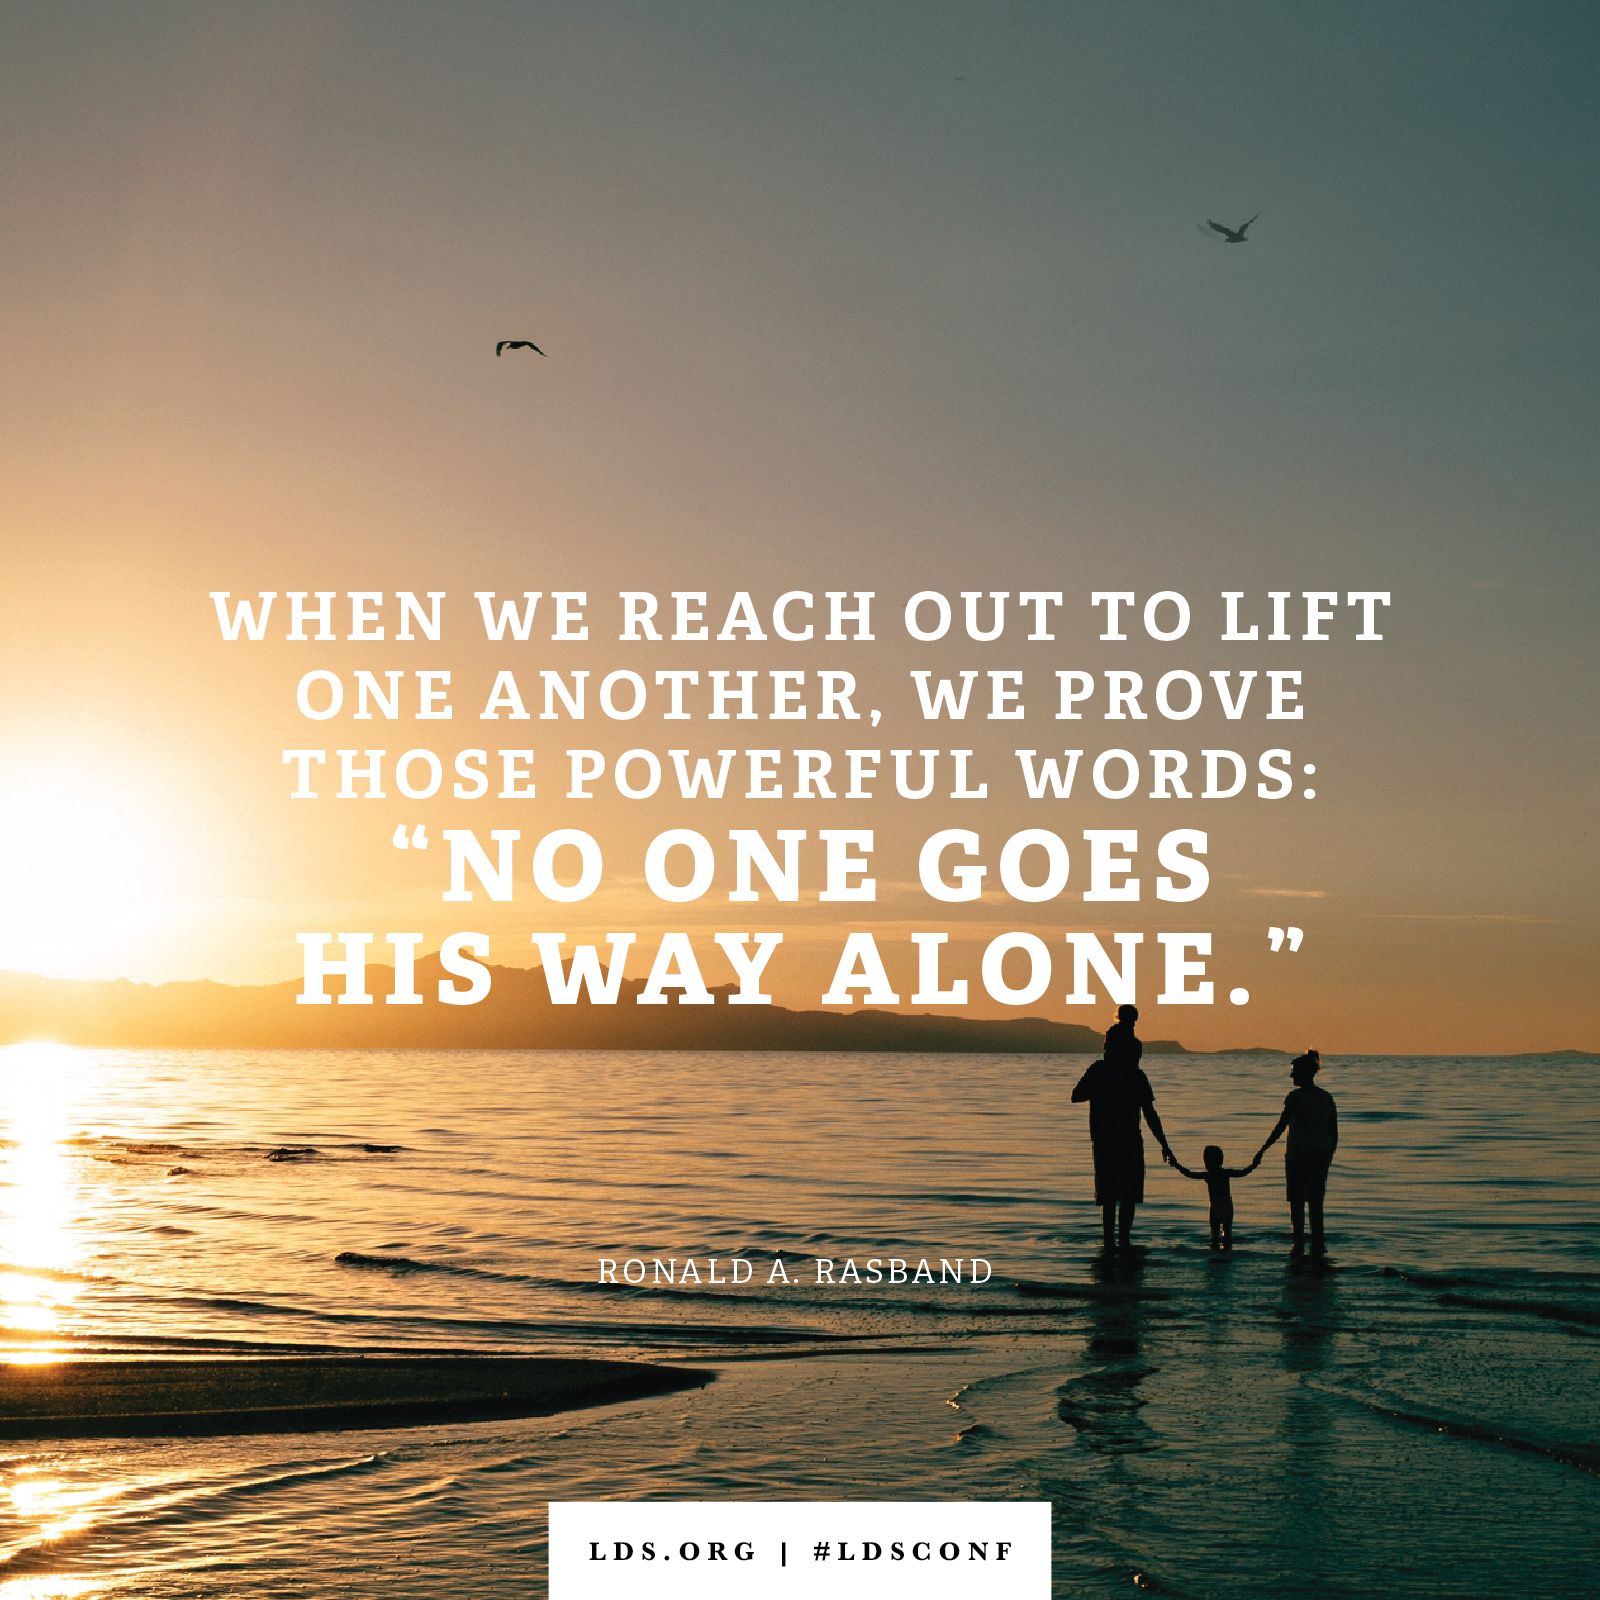 “When we reach out to lift one another, we prove those powerful words: ‘No one goes his way alone.’” —Elder Ronald A. Rasband, “Standing with the Leaders of the Church”